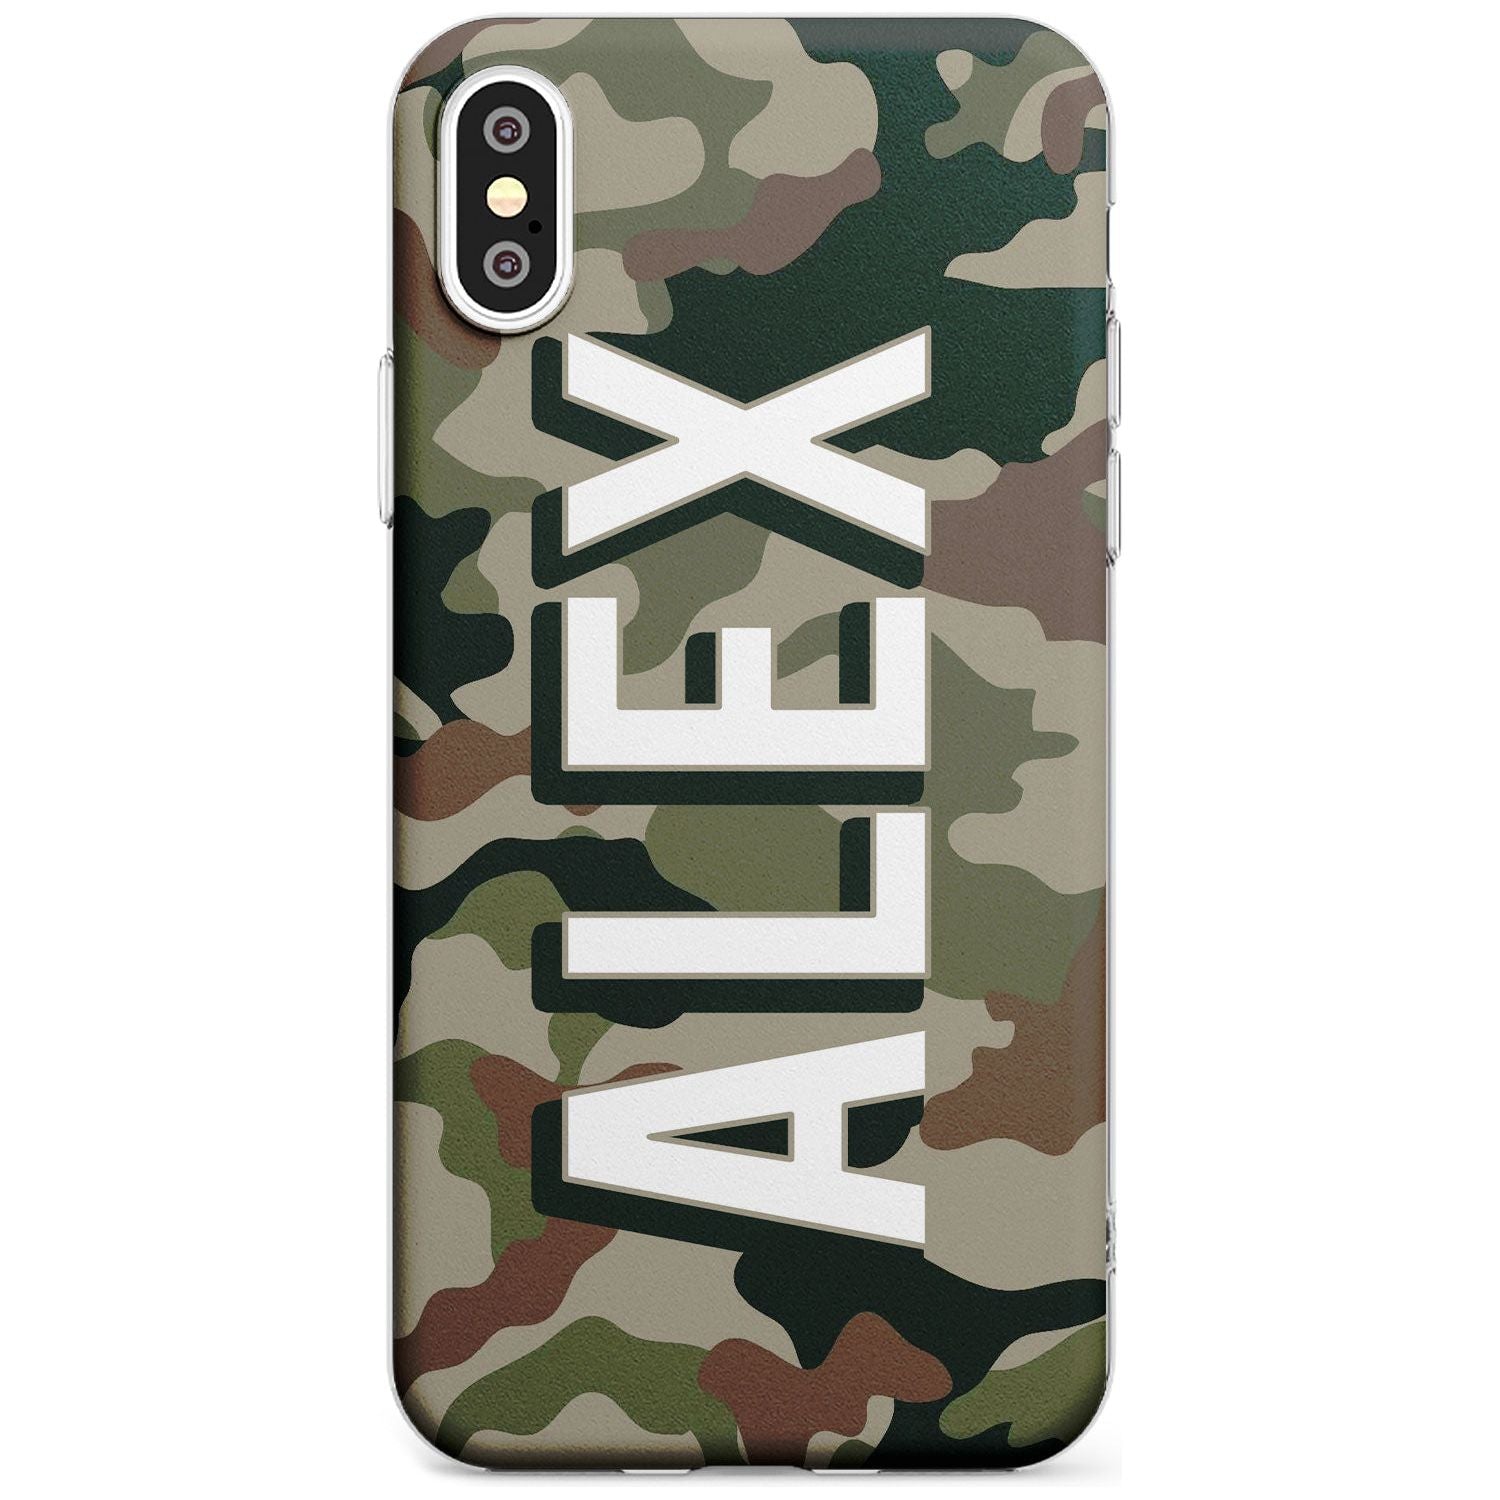 Classic Green Camo Black Impact Phone Case for iPhone X XS Max XR